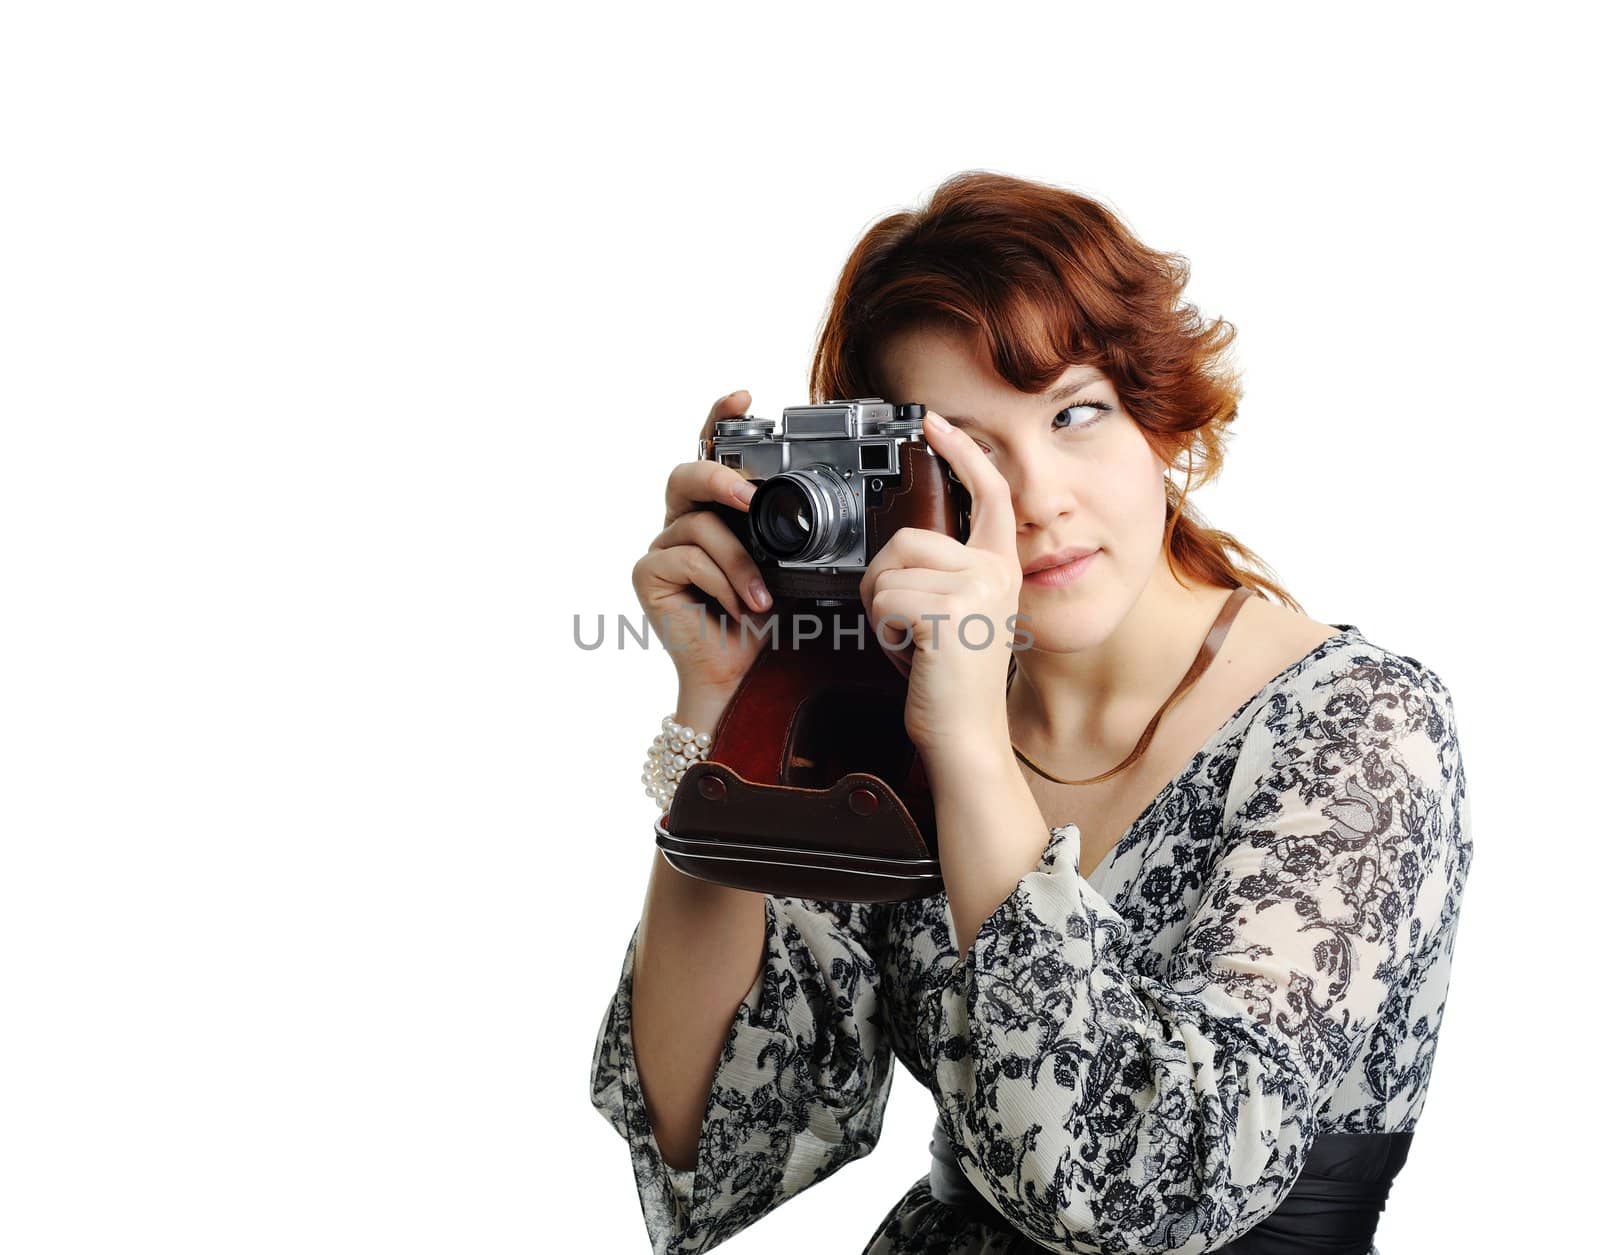 An image of a nice woman with a camera